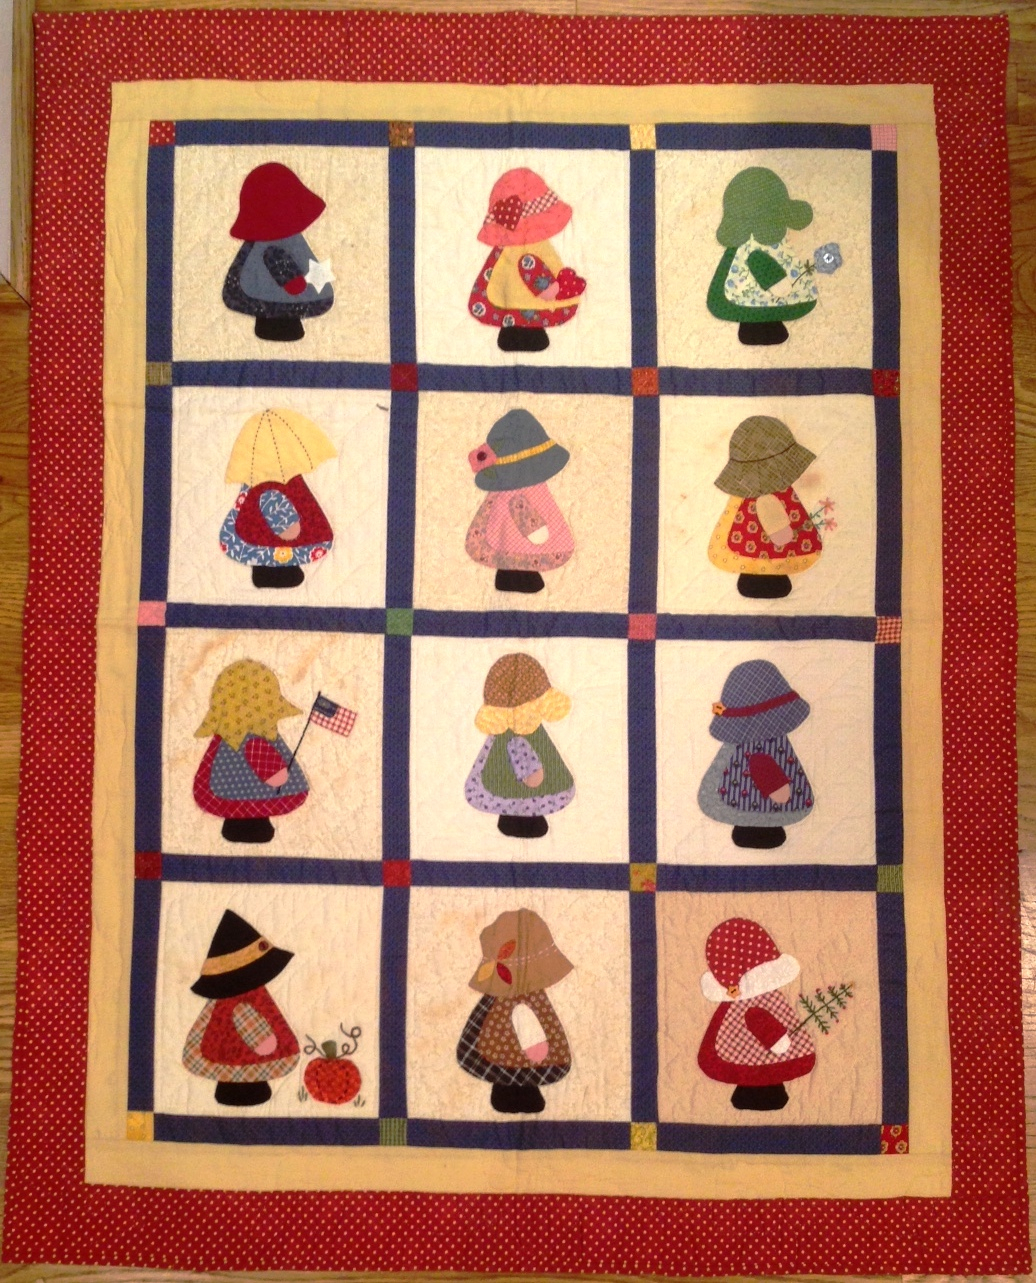 Sunbonnet Sue Embroidery Patterns Free Applique Sue And Hats For Sue